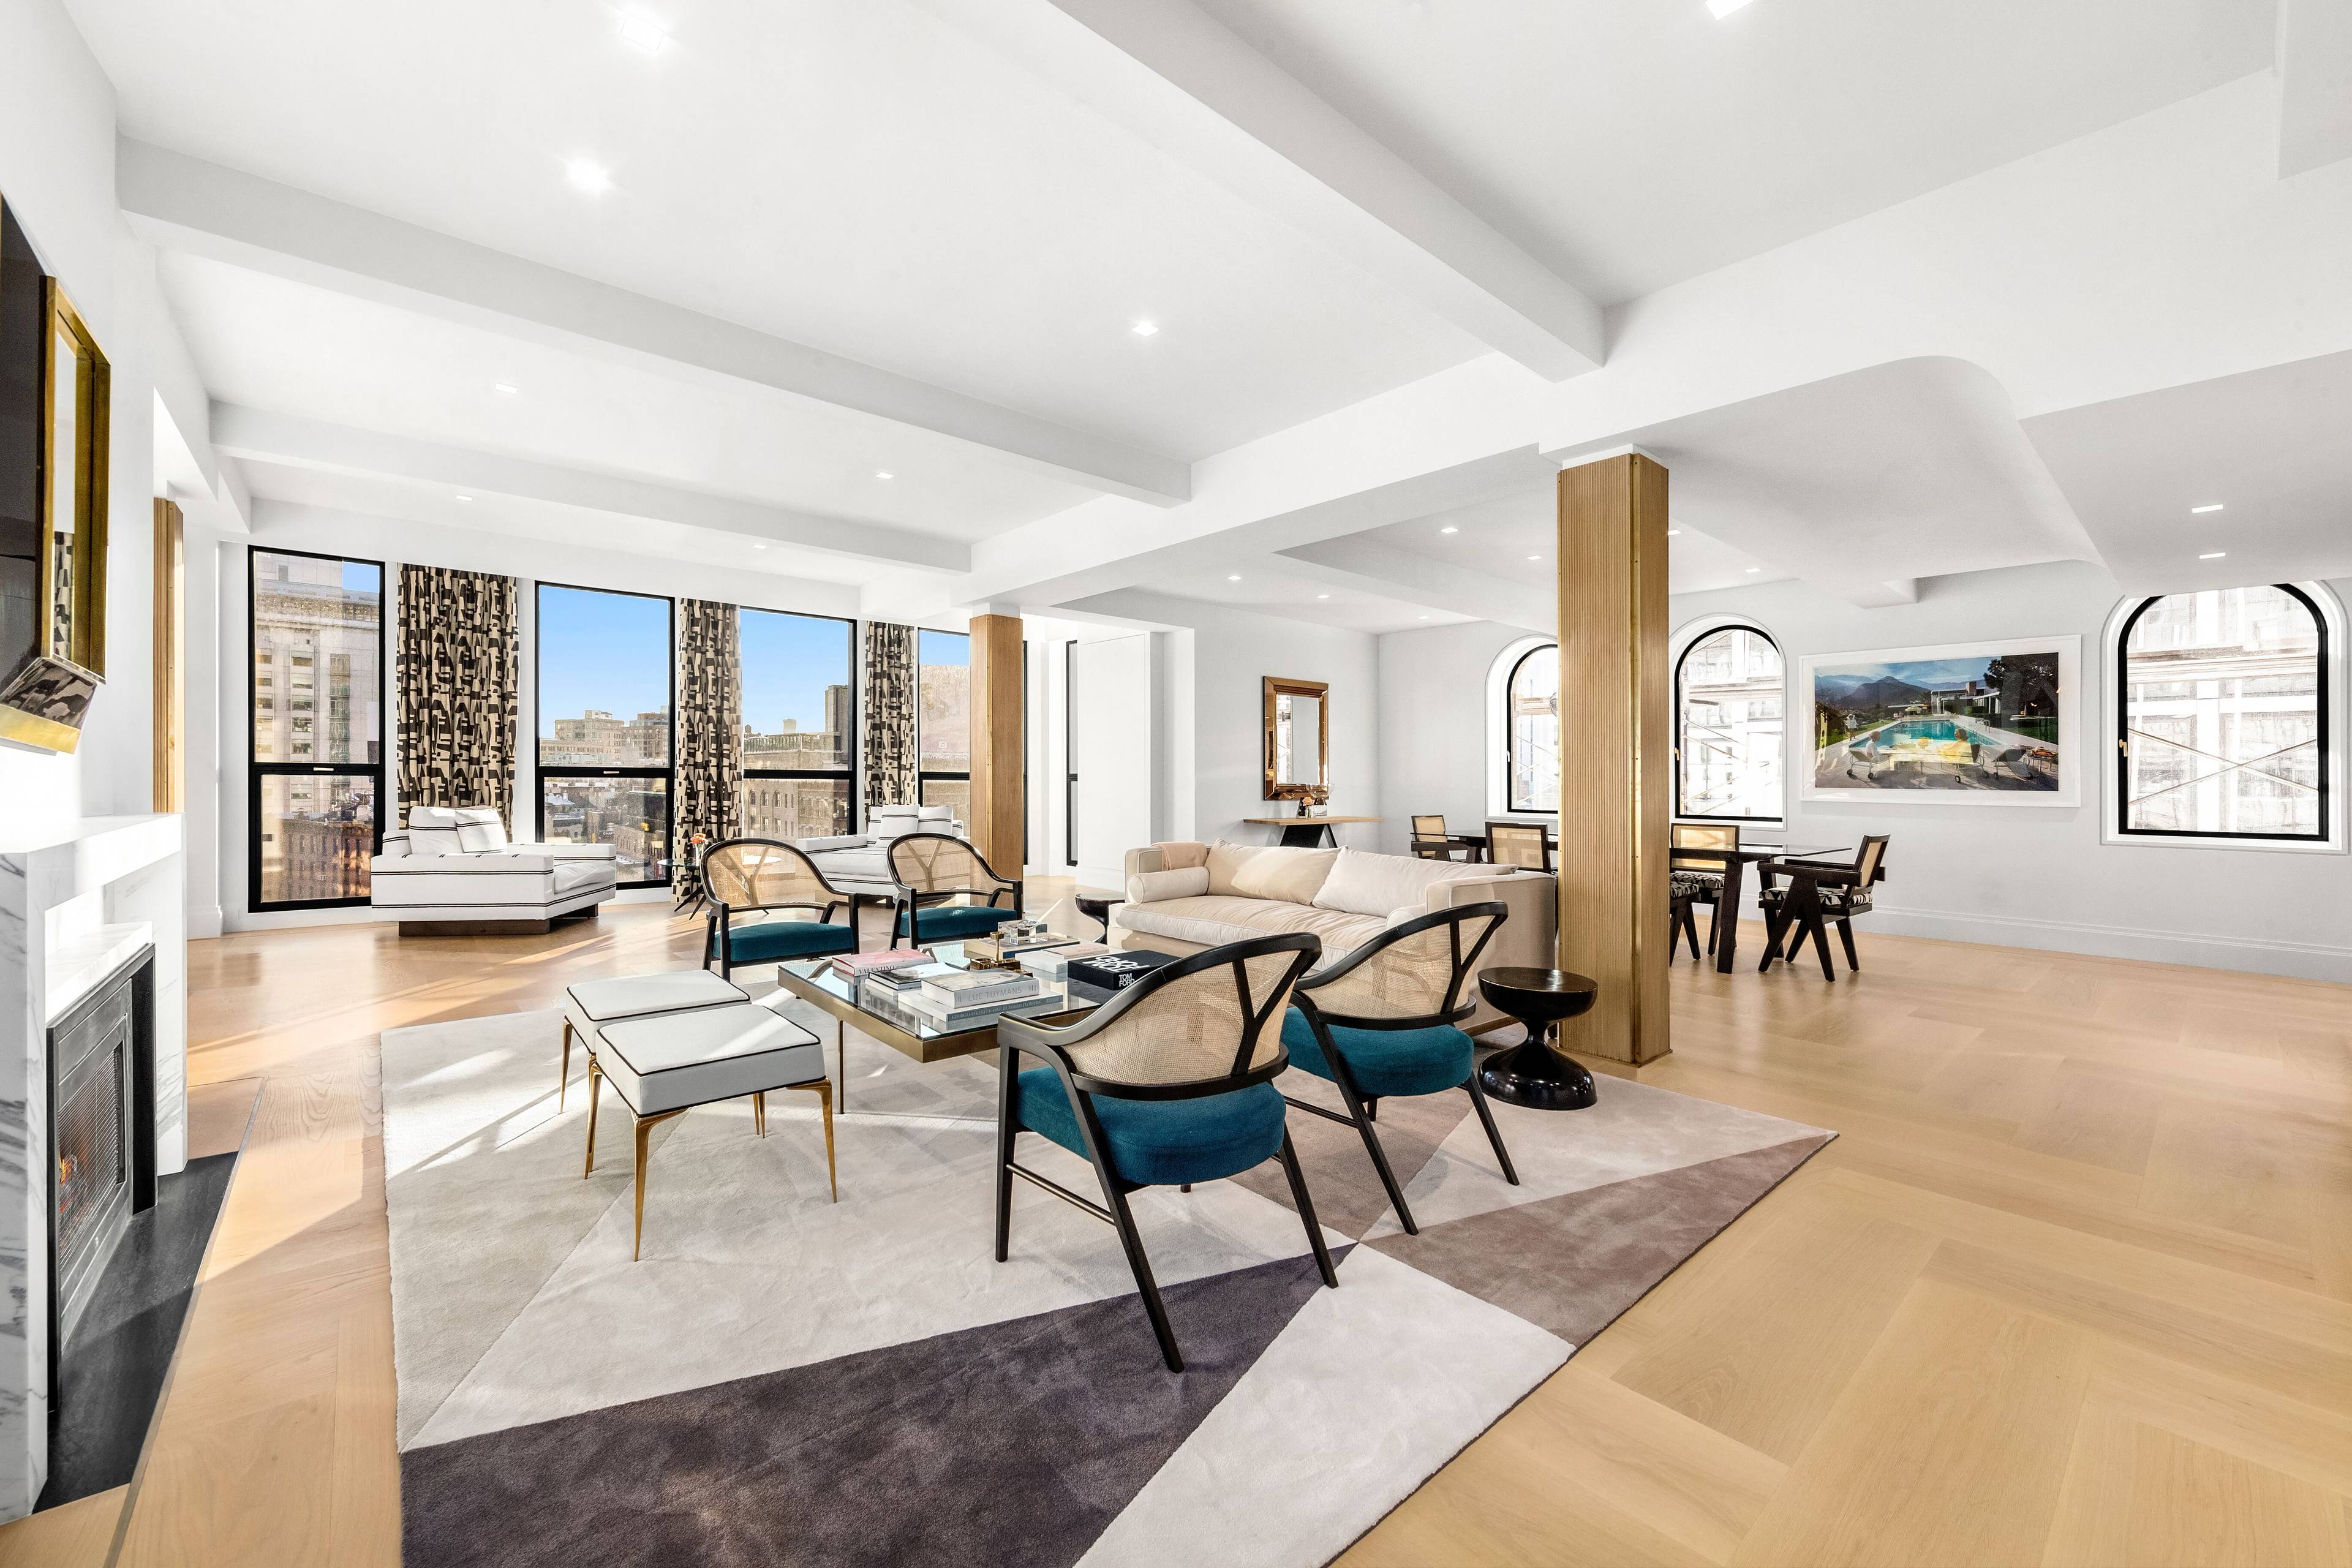 66 NINTH AVENUE | CONCIERGE LEVEL BOUTIQUE CONDO | 5,444SF FULL FLOOR 5 BEDROOM with PRIVATE TERRACE